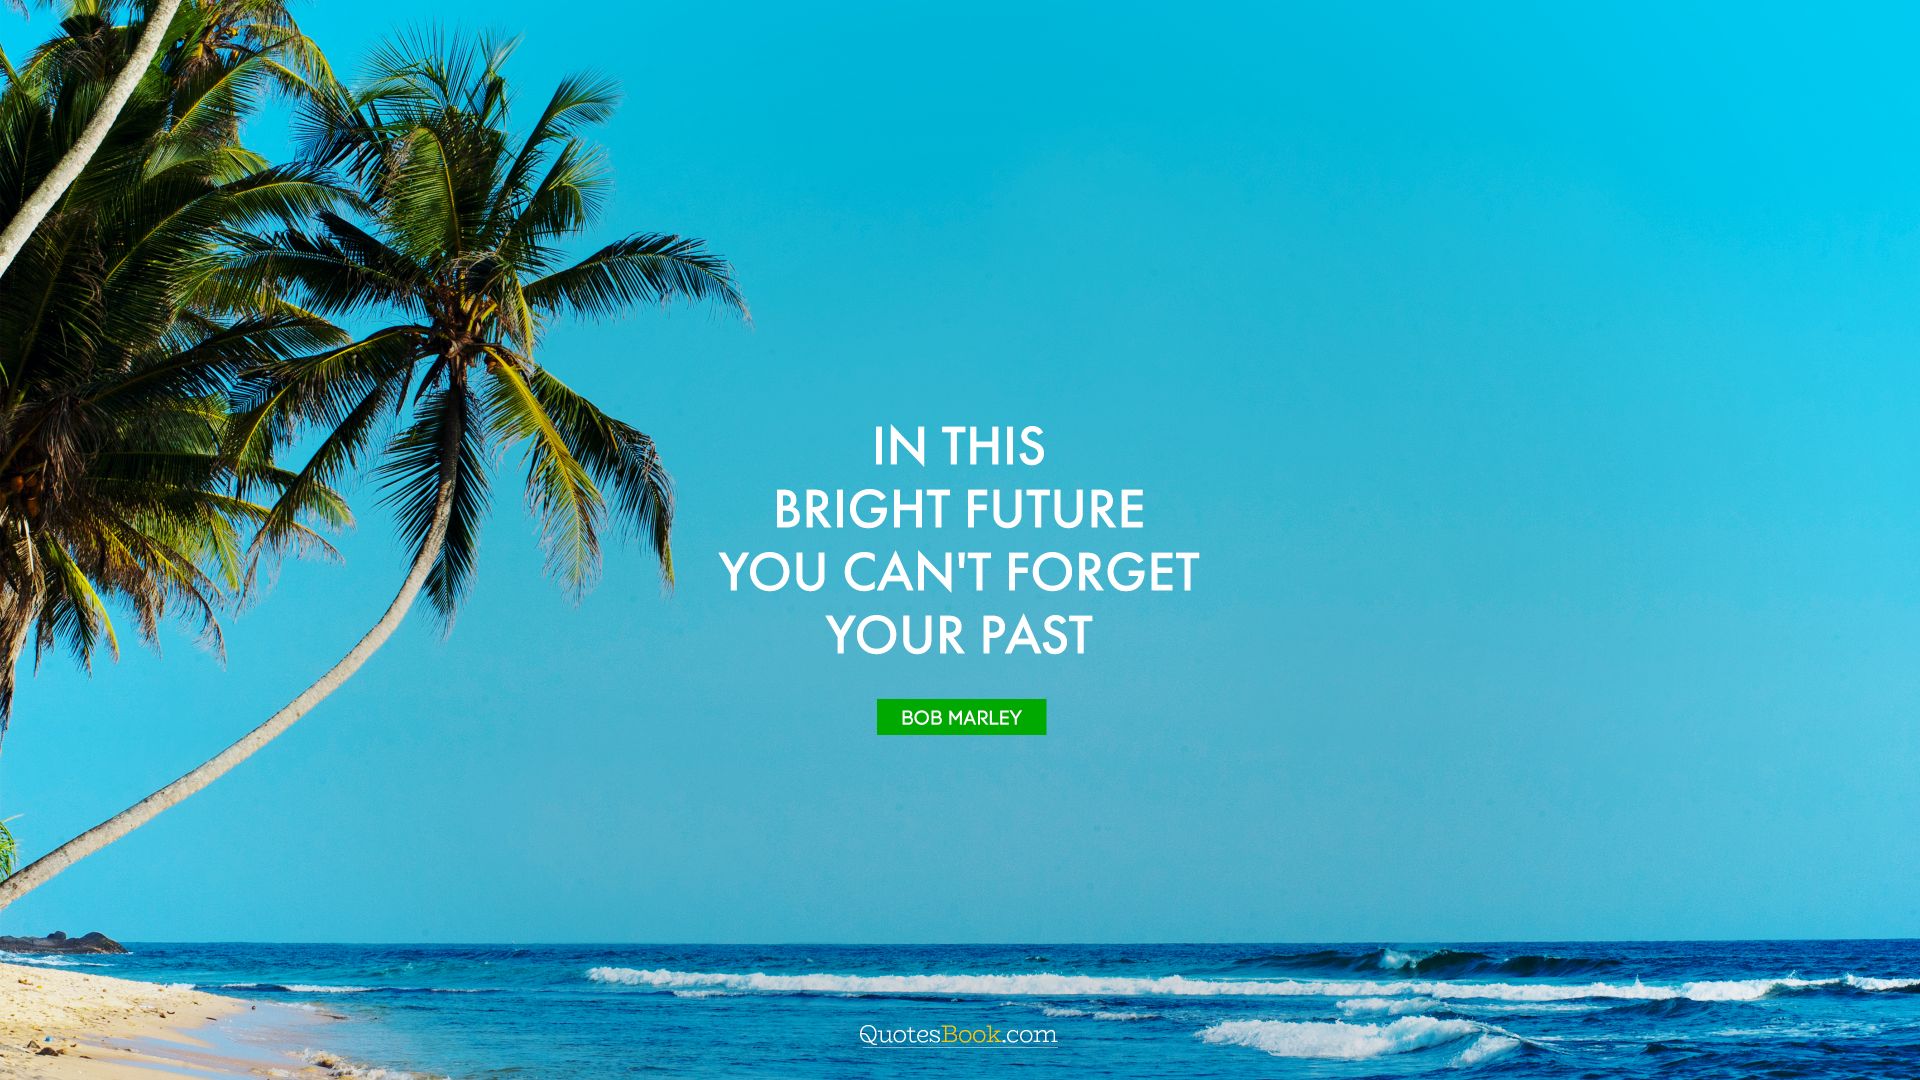 In this bright future you can't forget your past. - Quote by Bob Marley